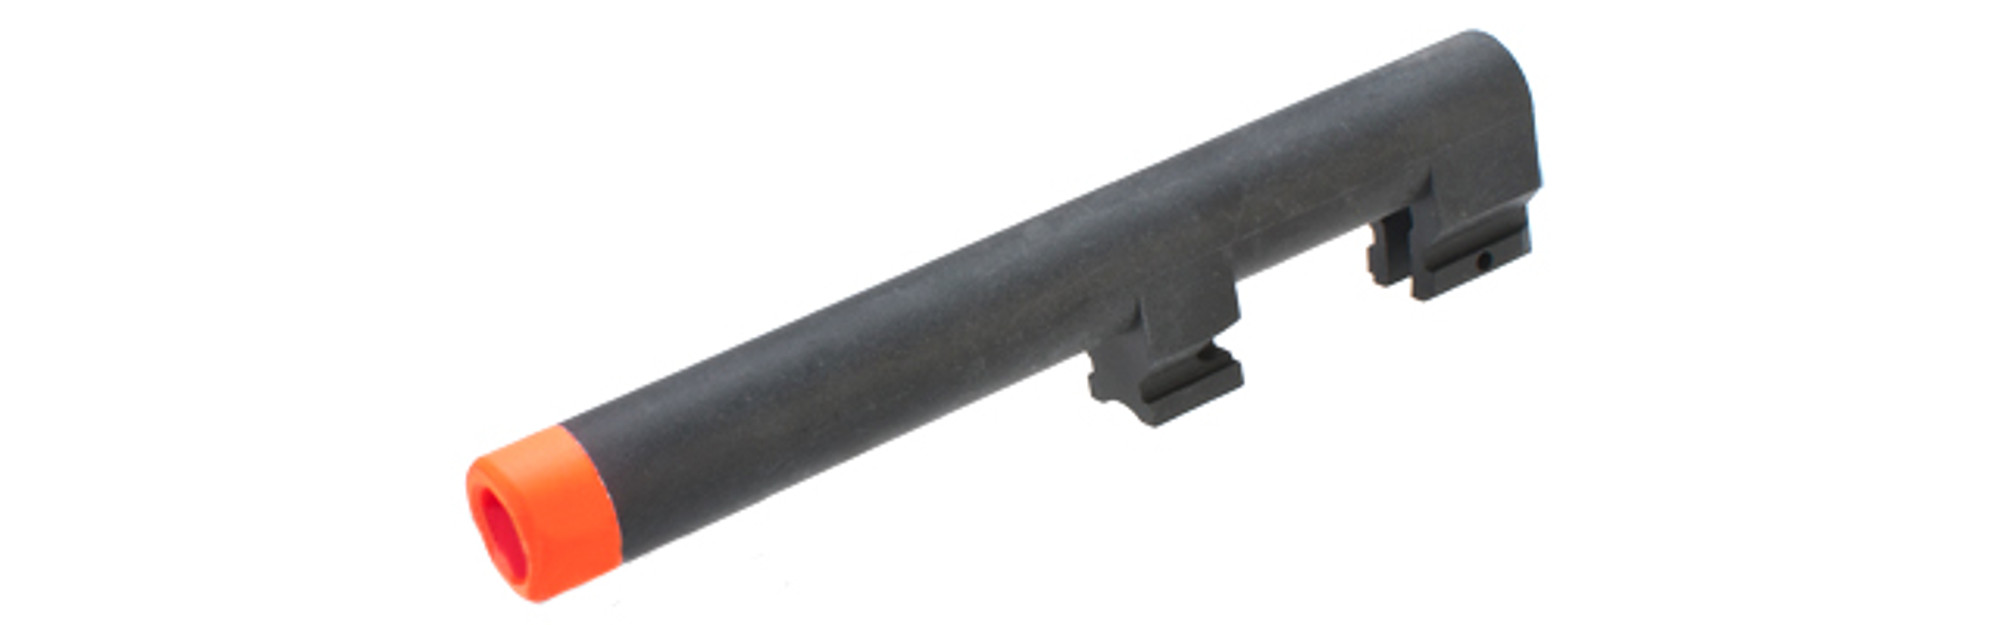 KWA Polymer Outer Barrel for M9 PTP Series Airsoft GBB Pistols